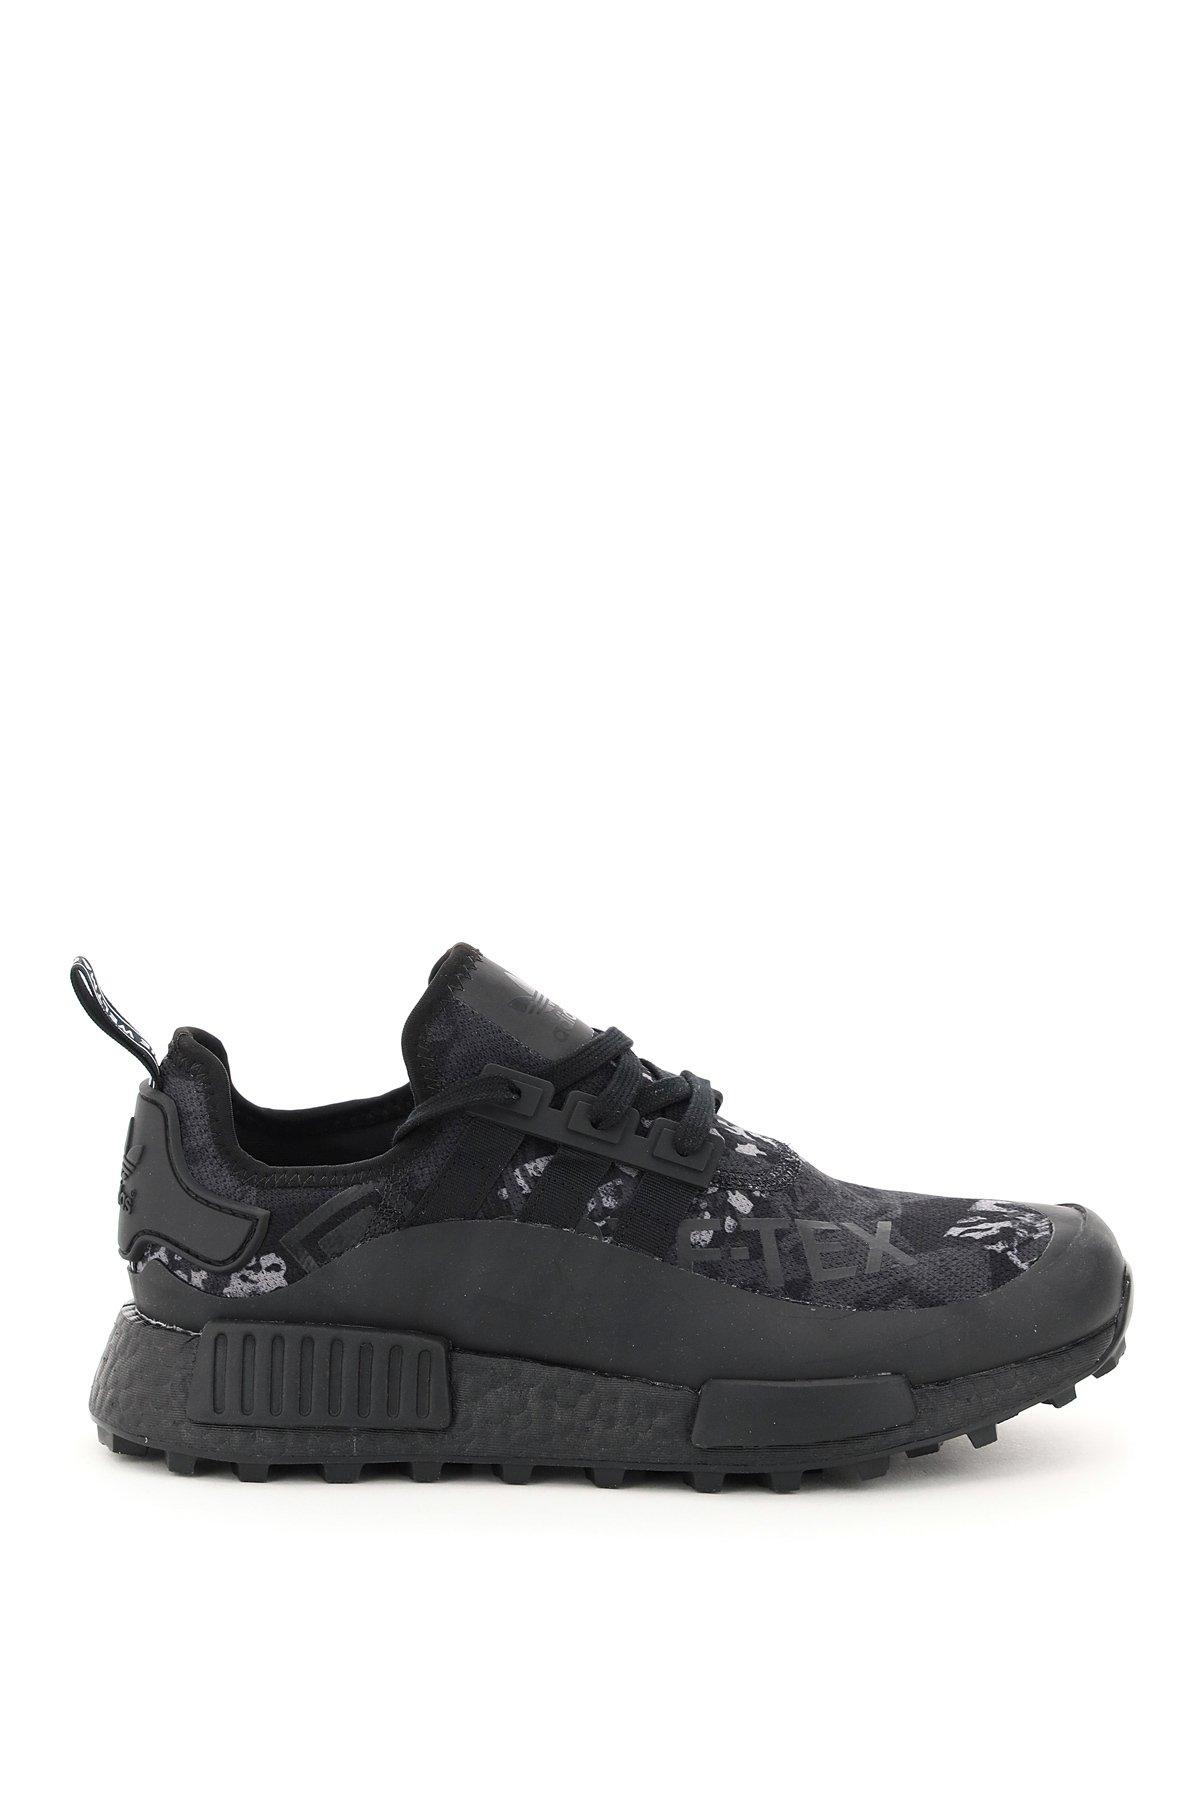 adidas Rubber Nomad Nmd R1 Trail Gore-tex Sneakers in Black 